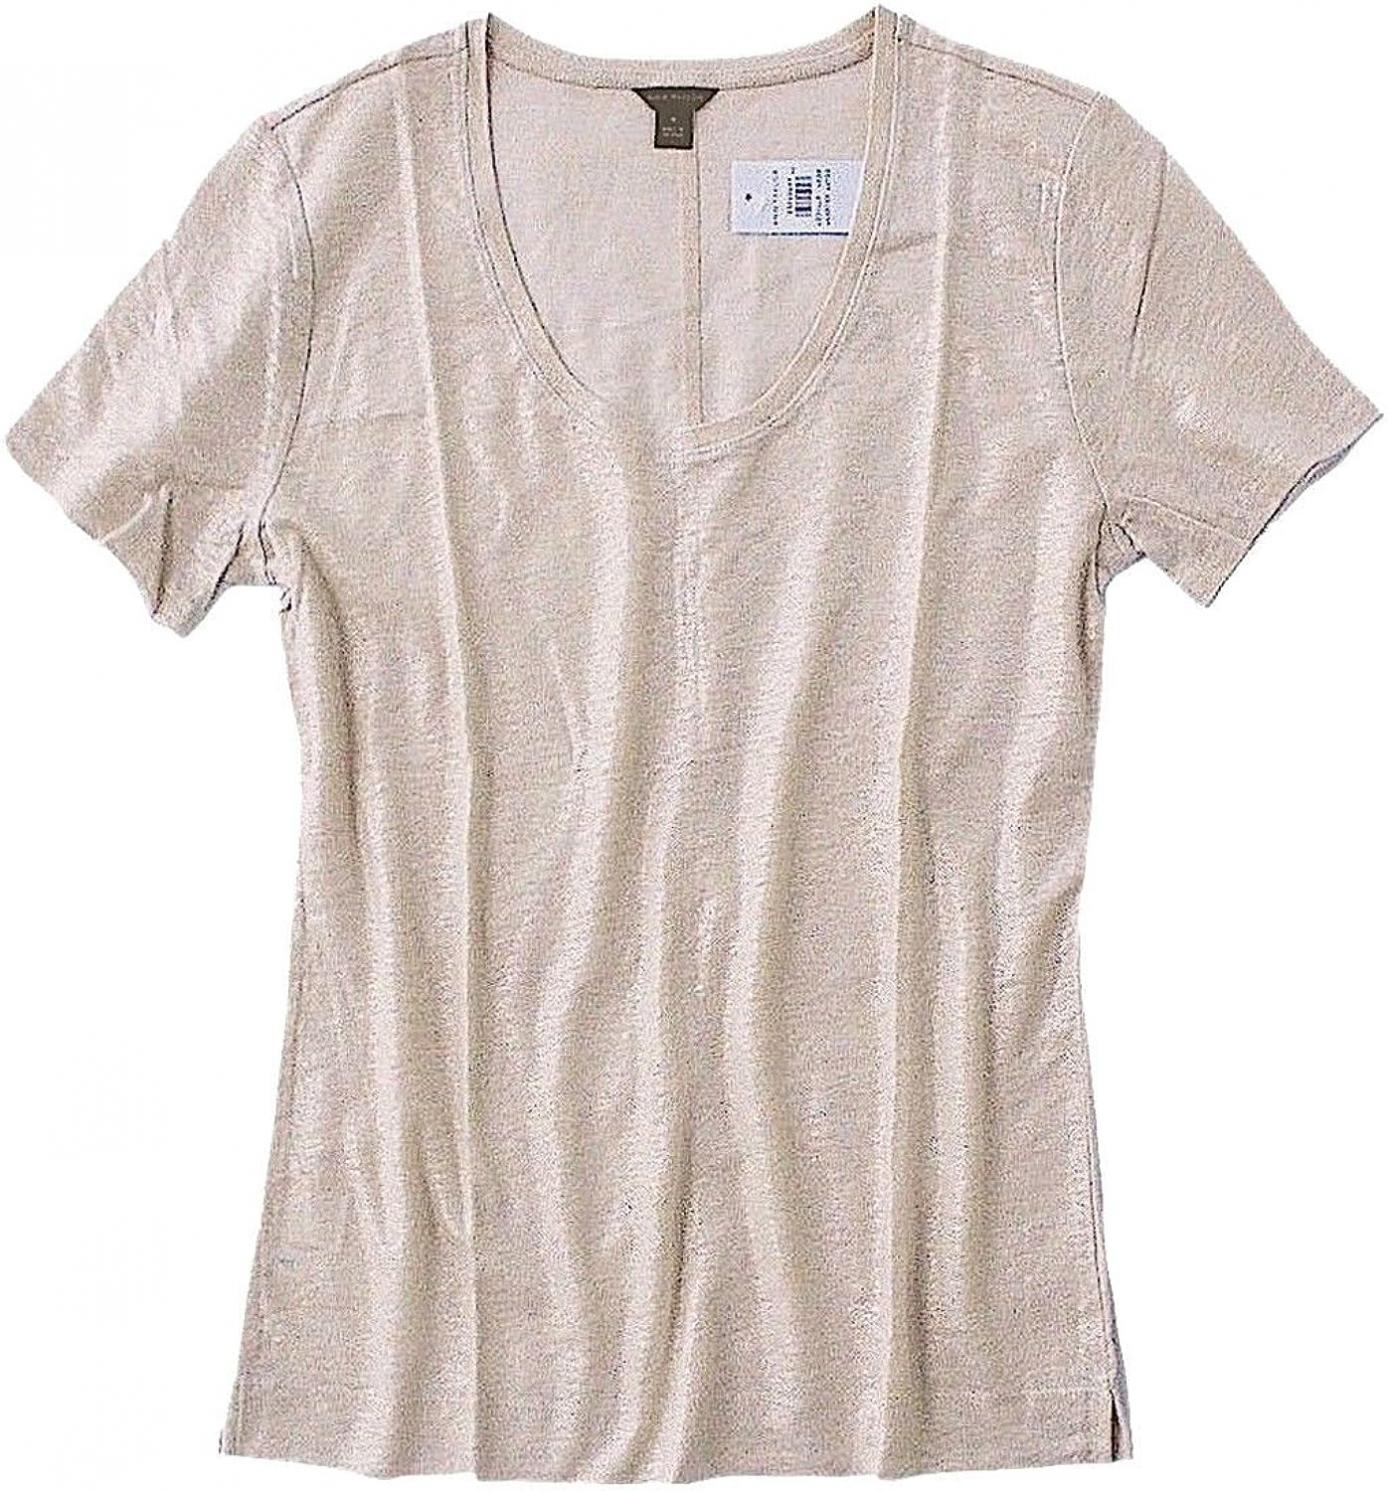 Ann Taylor - Women's - Solid Colors - Shimmery Champaign-Gold Linen Scoop Neck Tee